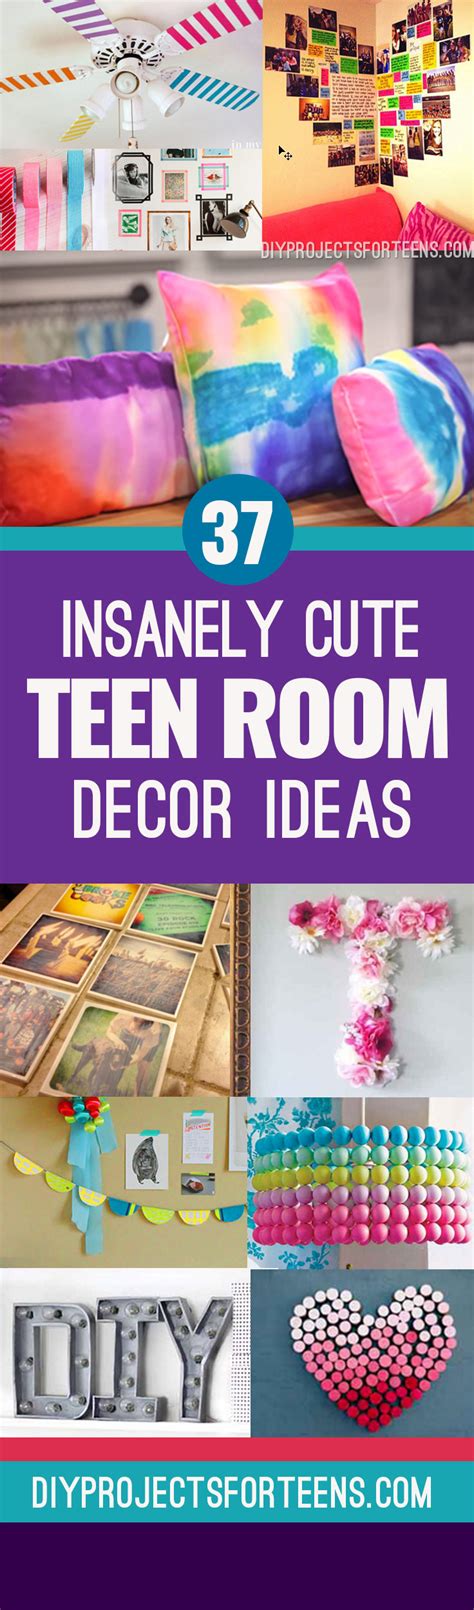 37 Insanely Cute Teen Bedroom Ideas For Diy Decor Crafts For Teens